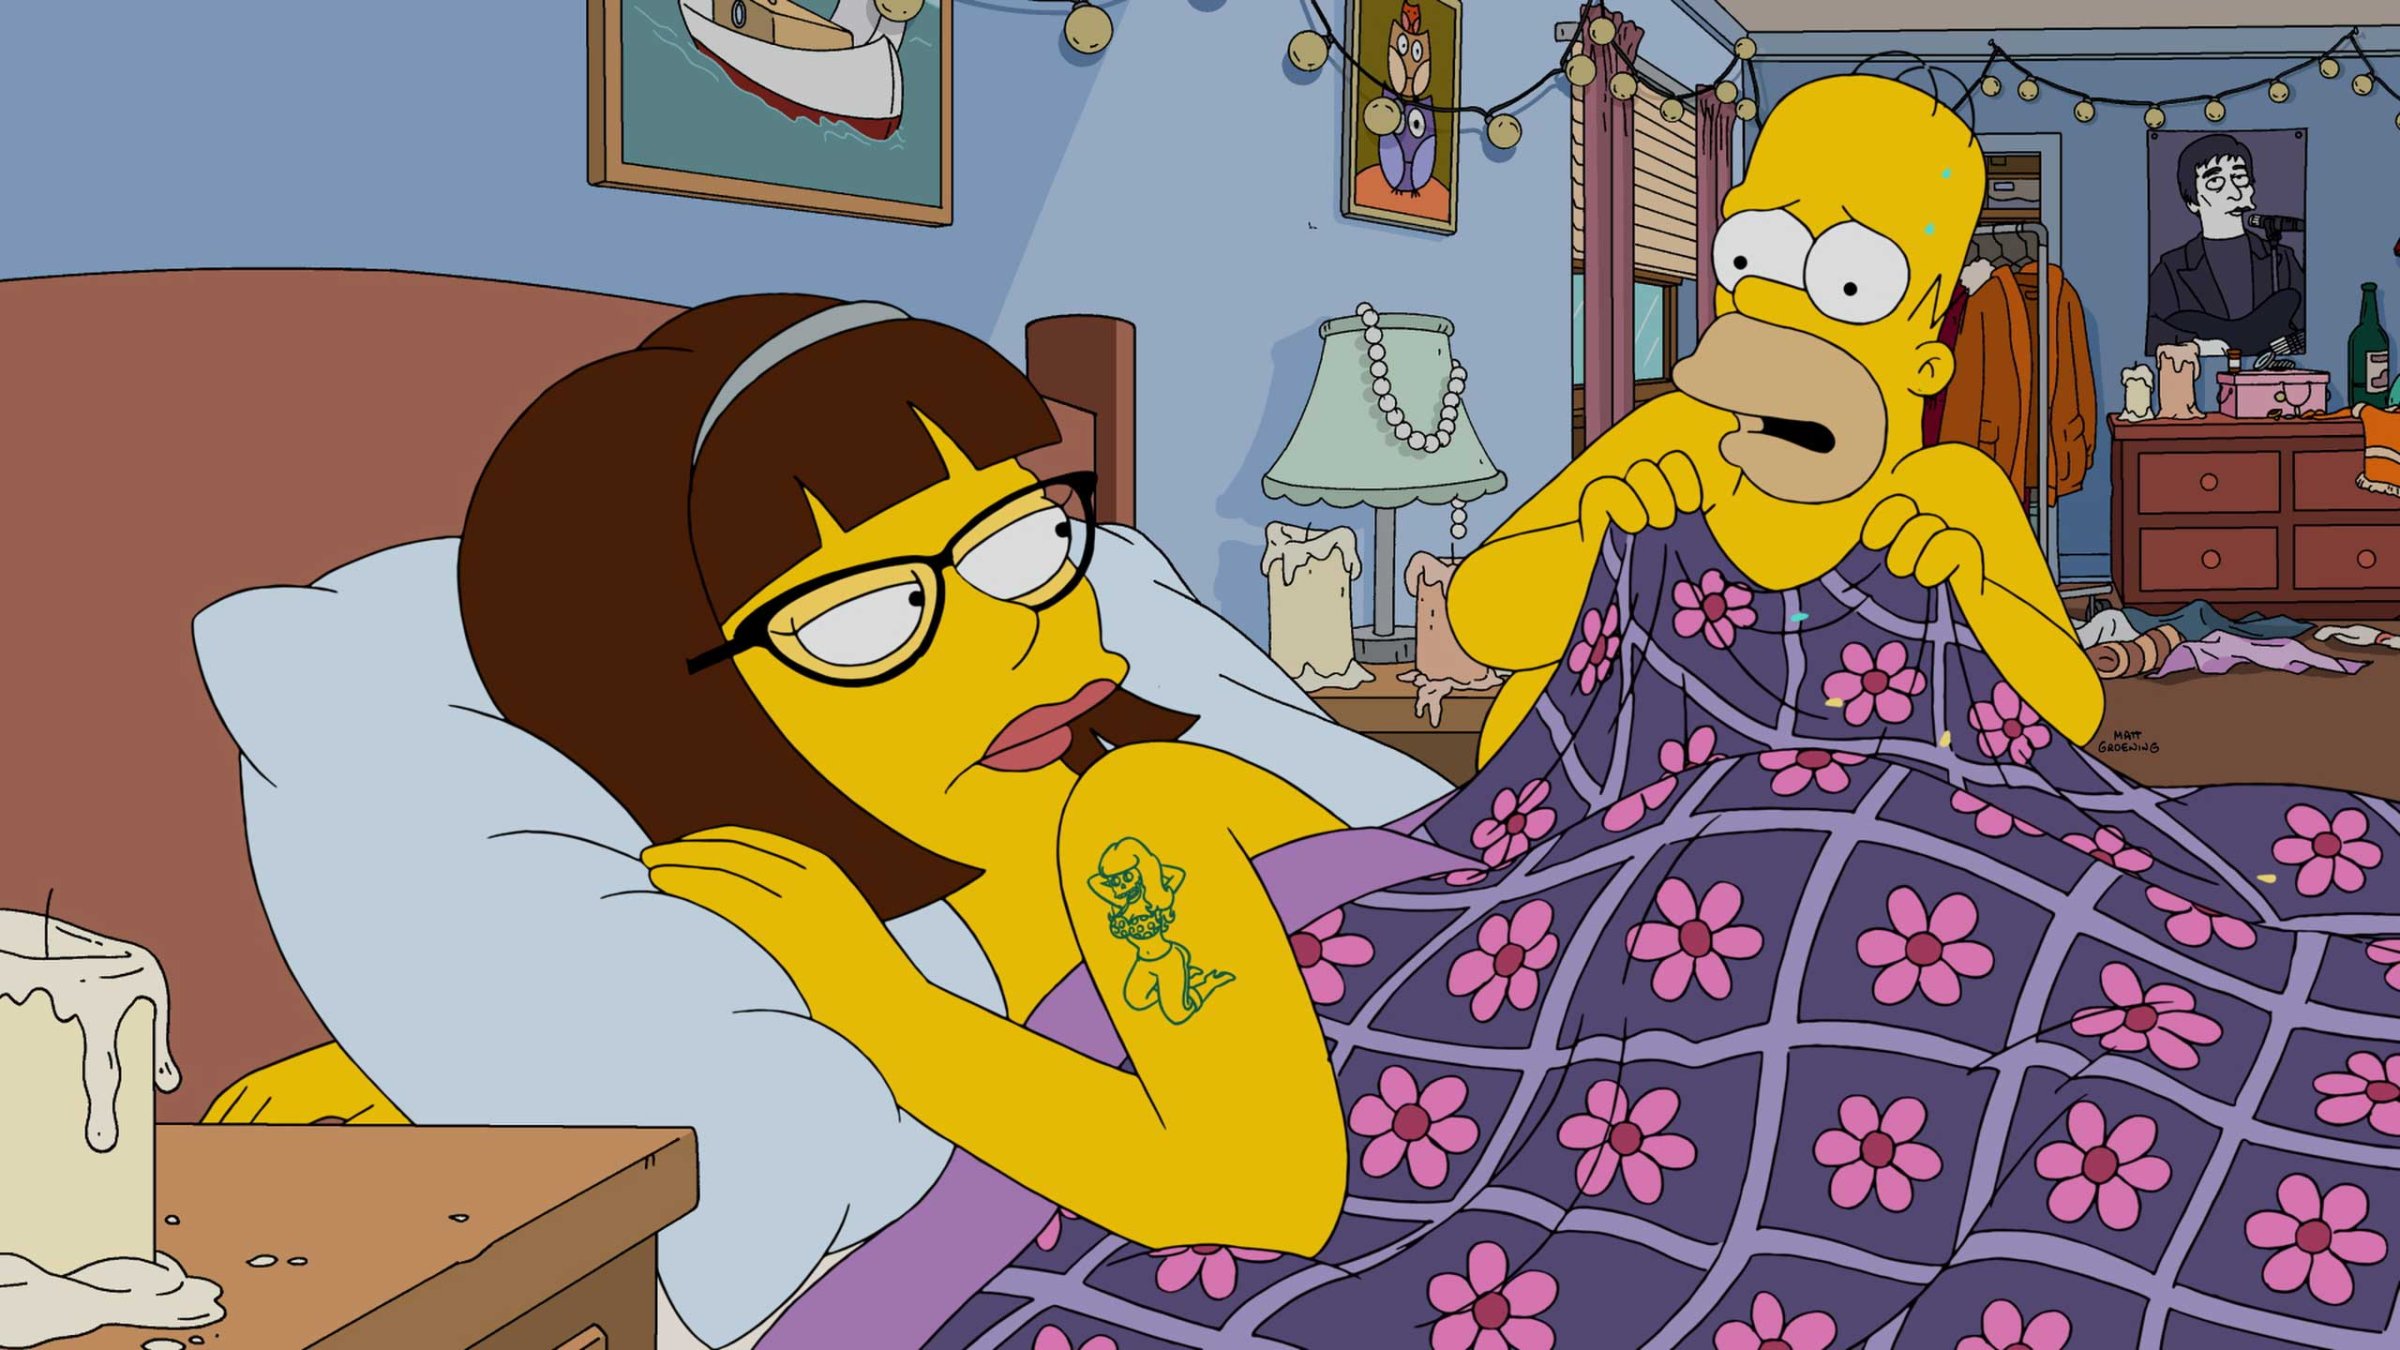 THE SIMPSONS: Lena Dunham guest voices in the "Every Man's Dream" season 27 premiere episode of THE SIMPSONS airing Sunday, Sept. 27 (8:00-8:30 PM ET/PT) on FOX.  THE SIMPSONS ™ and © 2015 TCFFC ALL RIGHTS RESERVED.